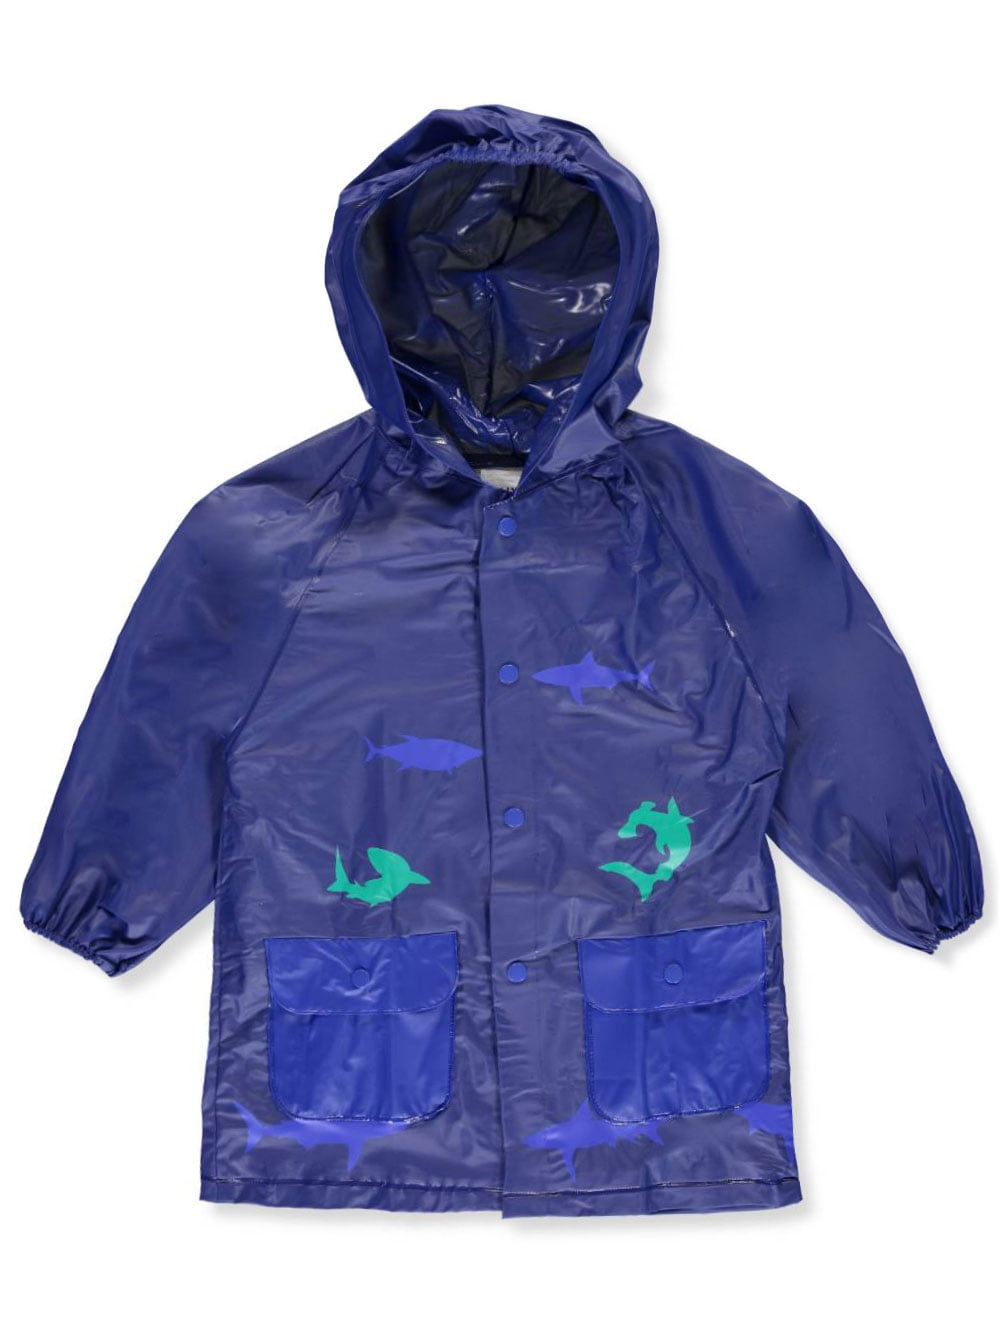 Lilly of New York Girls and Boys Waterproof Lightweight Rain Jacket with Hood and Pockets for Kids 